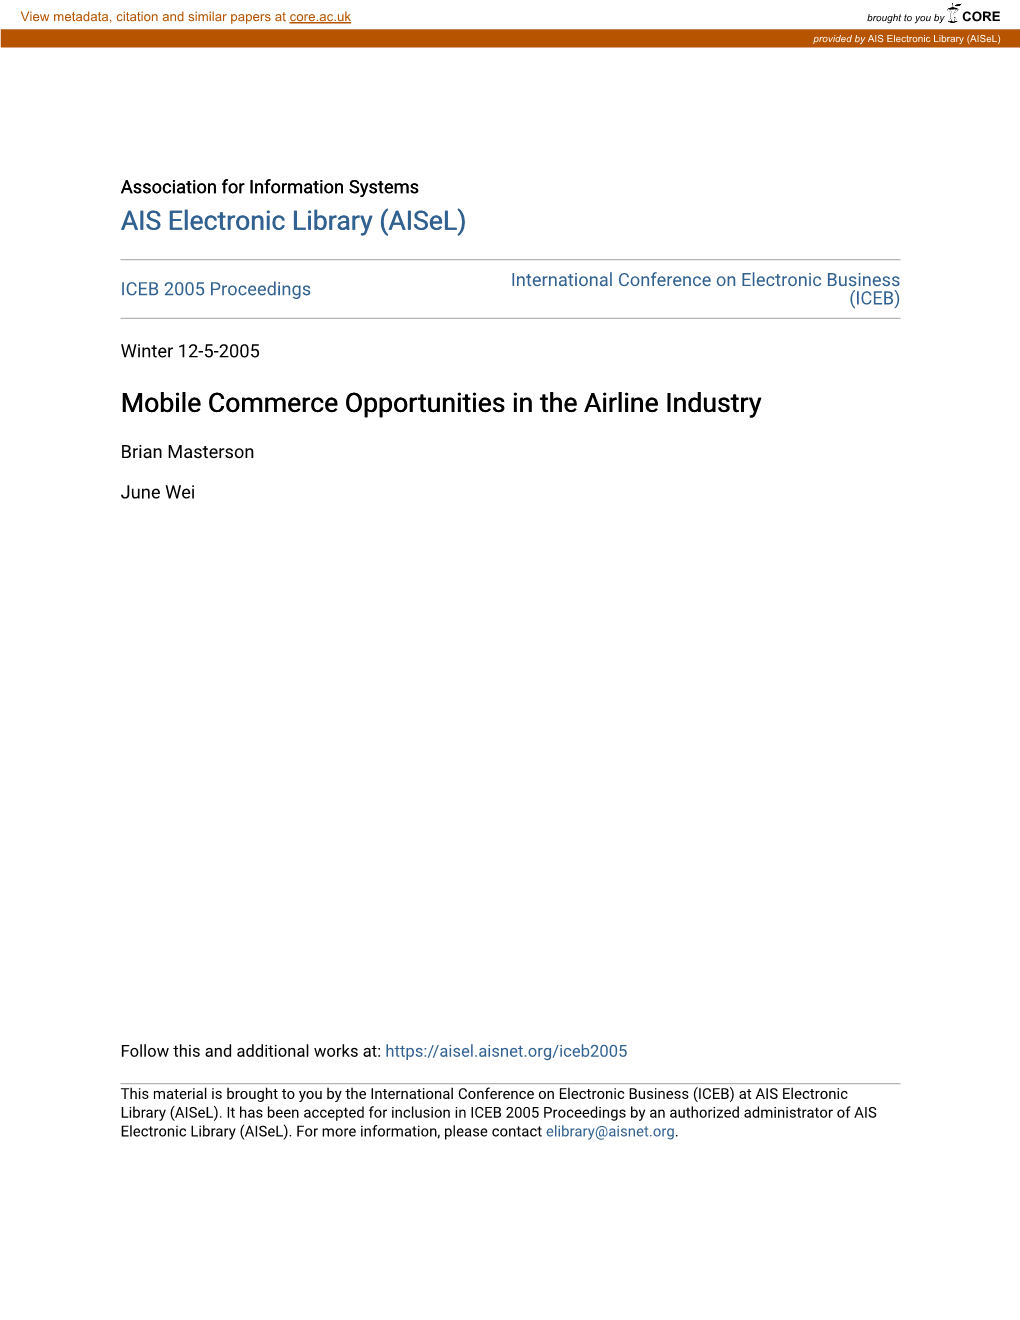 Mobile Commerce Opportunities in the Airline Industry